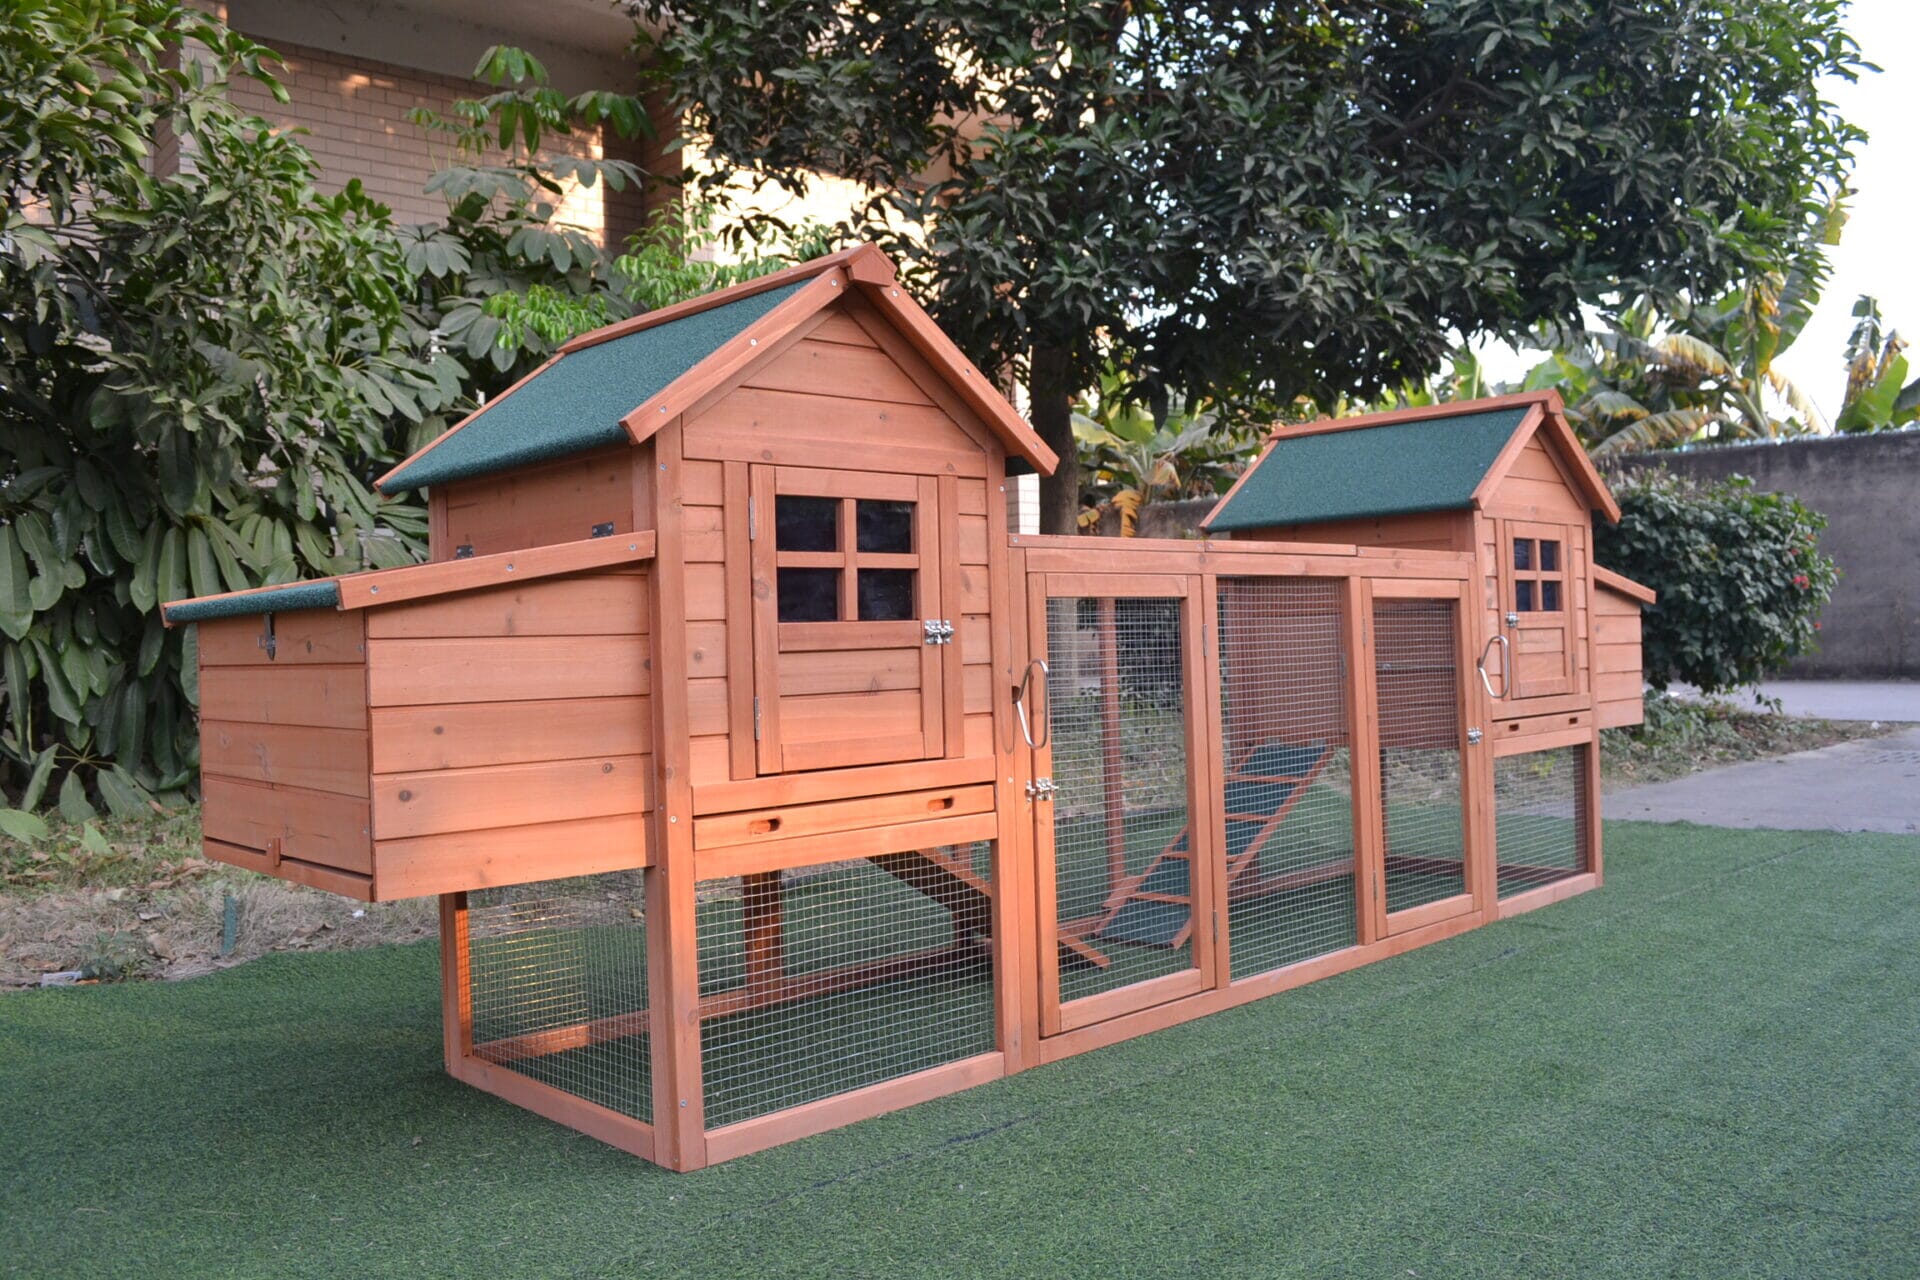 5 Cheap Chicken Run Ideas That Will Keep Your Poultry Safe and Happy!